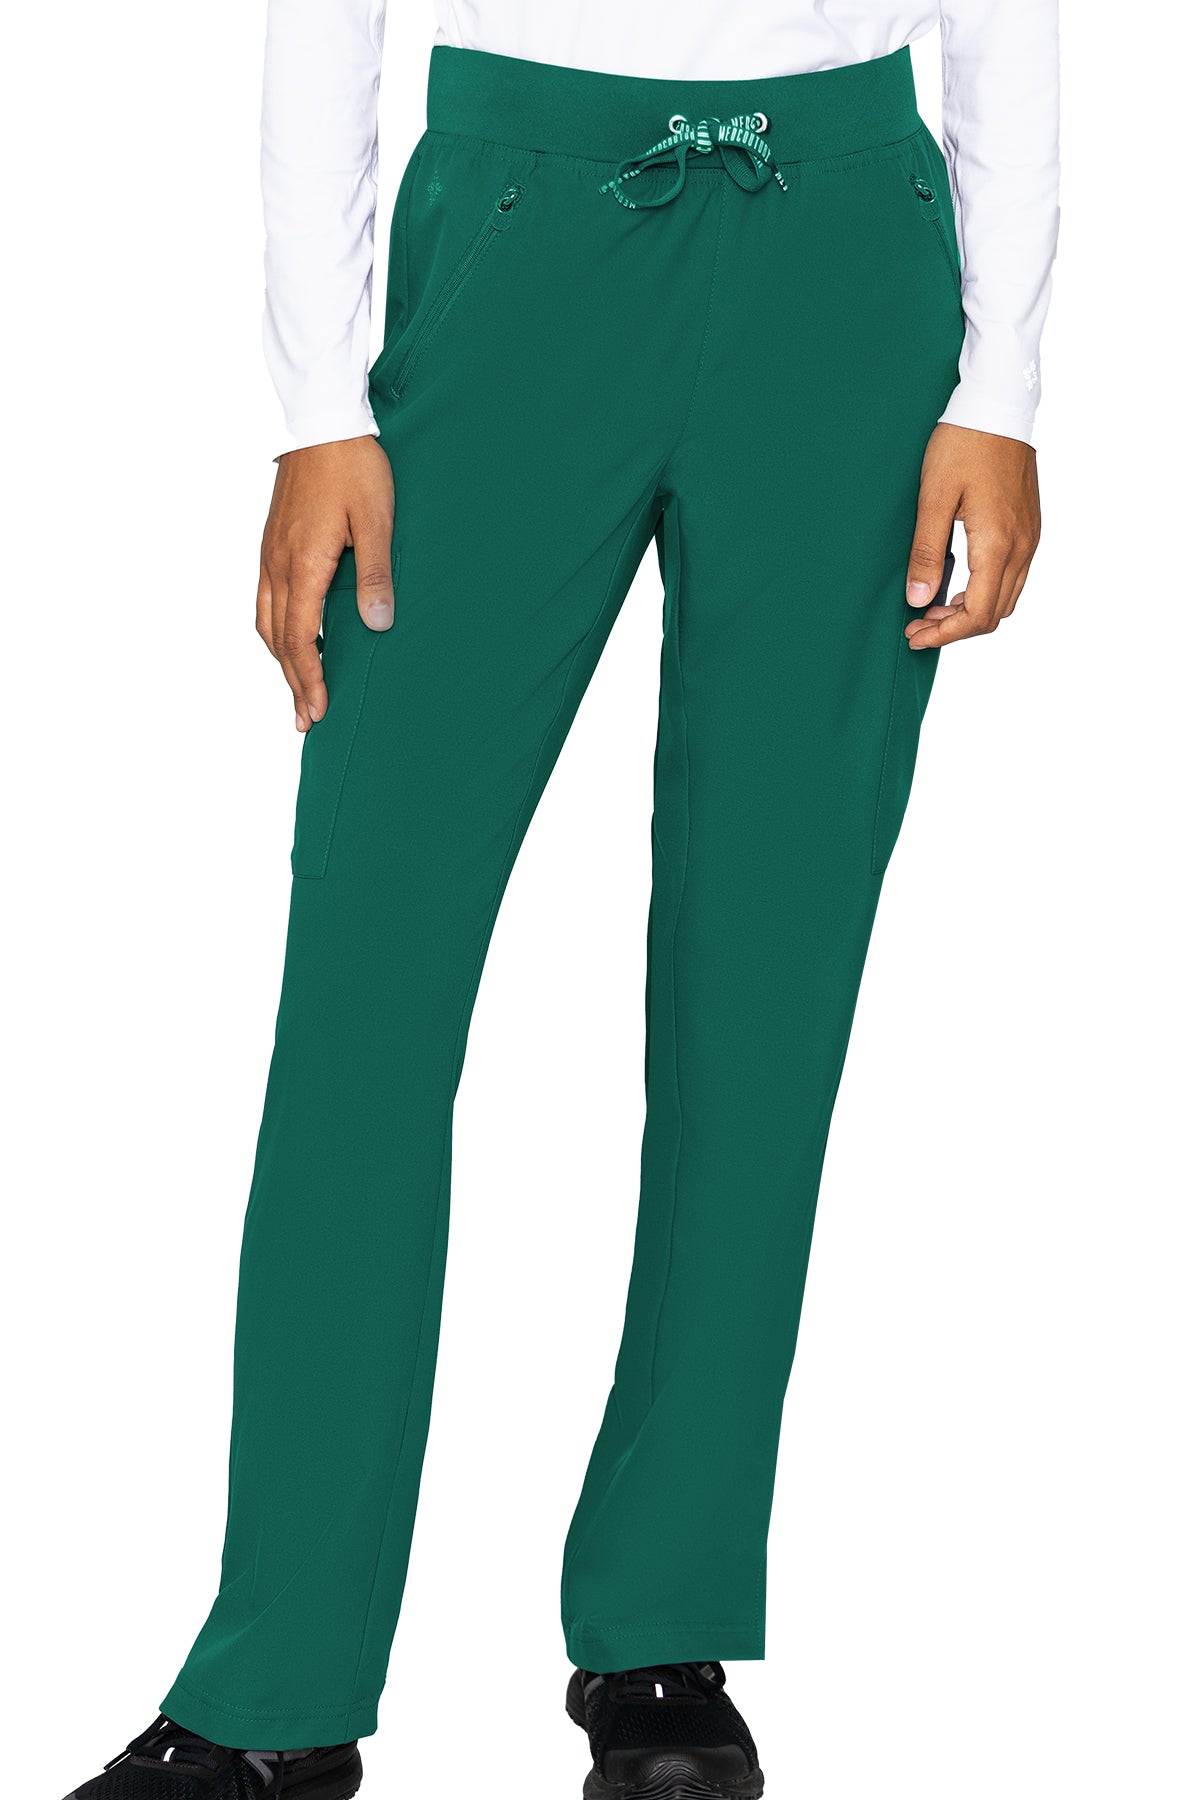 Med Couture Tall Scrub Pants Insight Zipper Pant in Hunter at Parker's Clothing and Shoes.